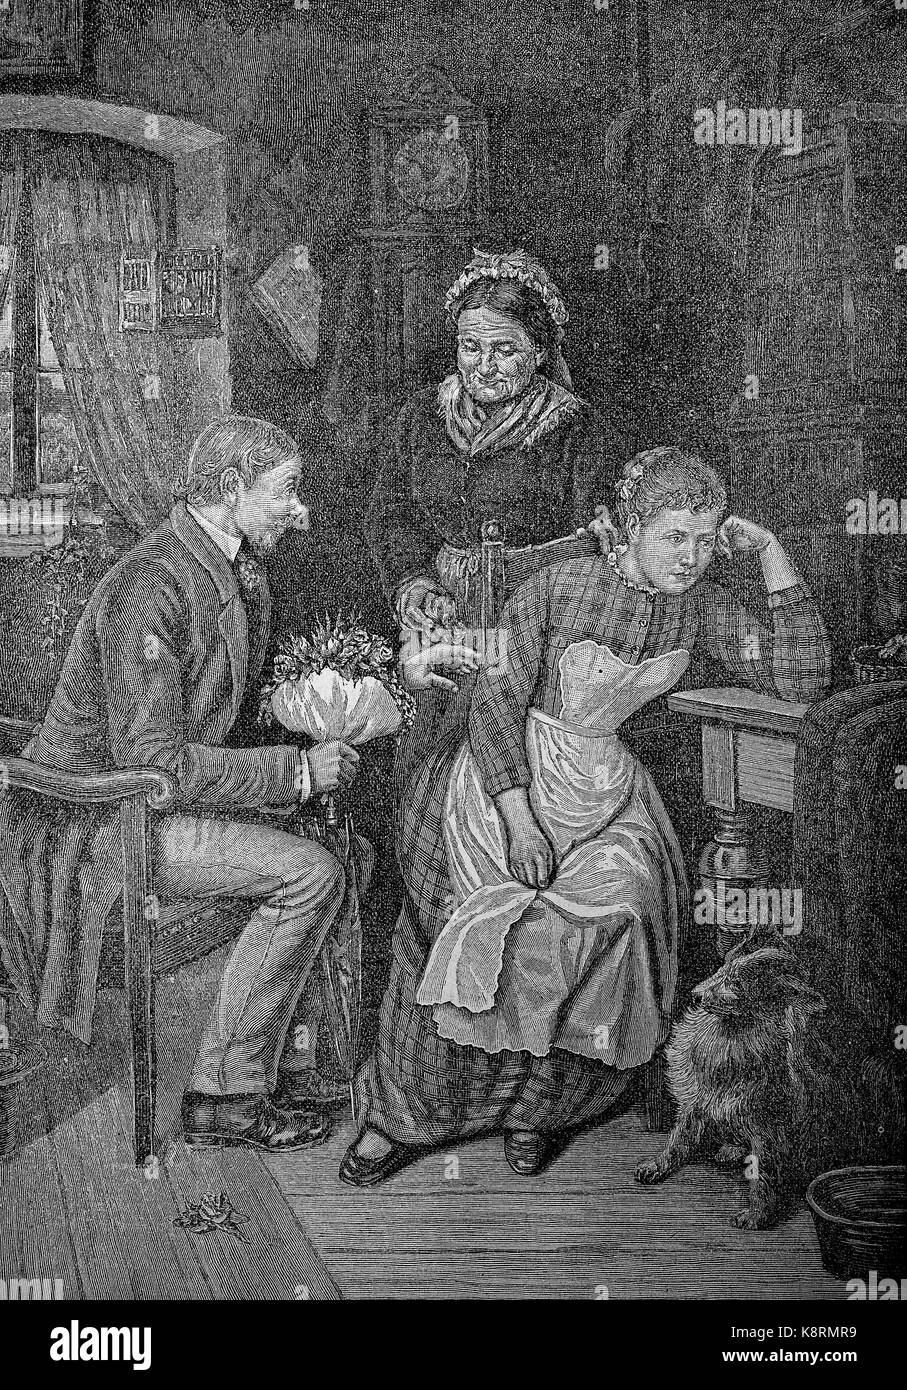 The unpleasant suitor, Young Man, wants to marry a girl, but she will not have him, Der unangenehme Freier, Junger Mann will um die Hand eines Mädchens anhalten, diese will ihn aber nicht haben, digital improved reproduction of a woodcut, published in the 19th century Stock Photo